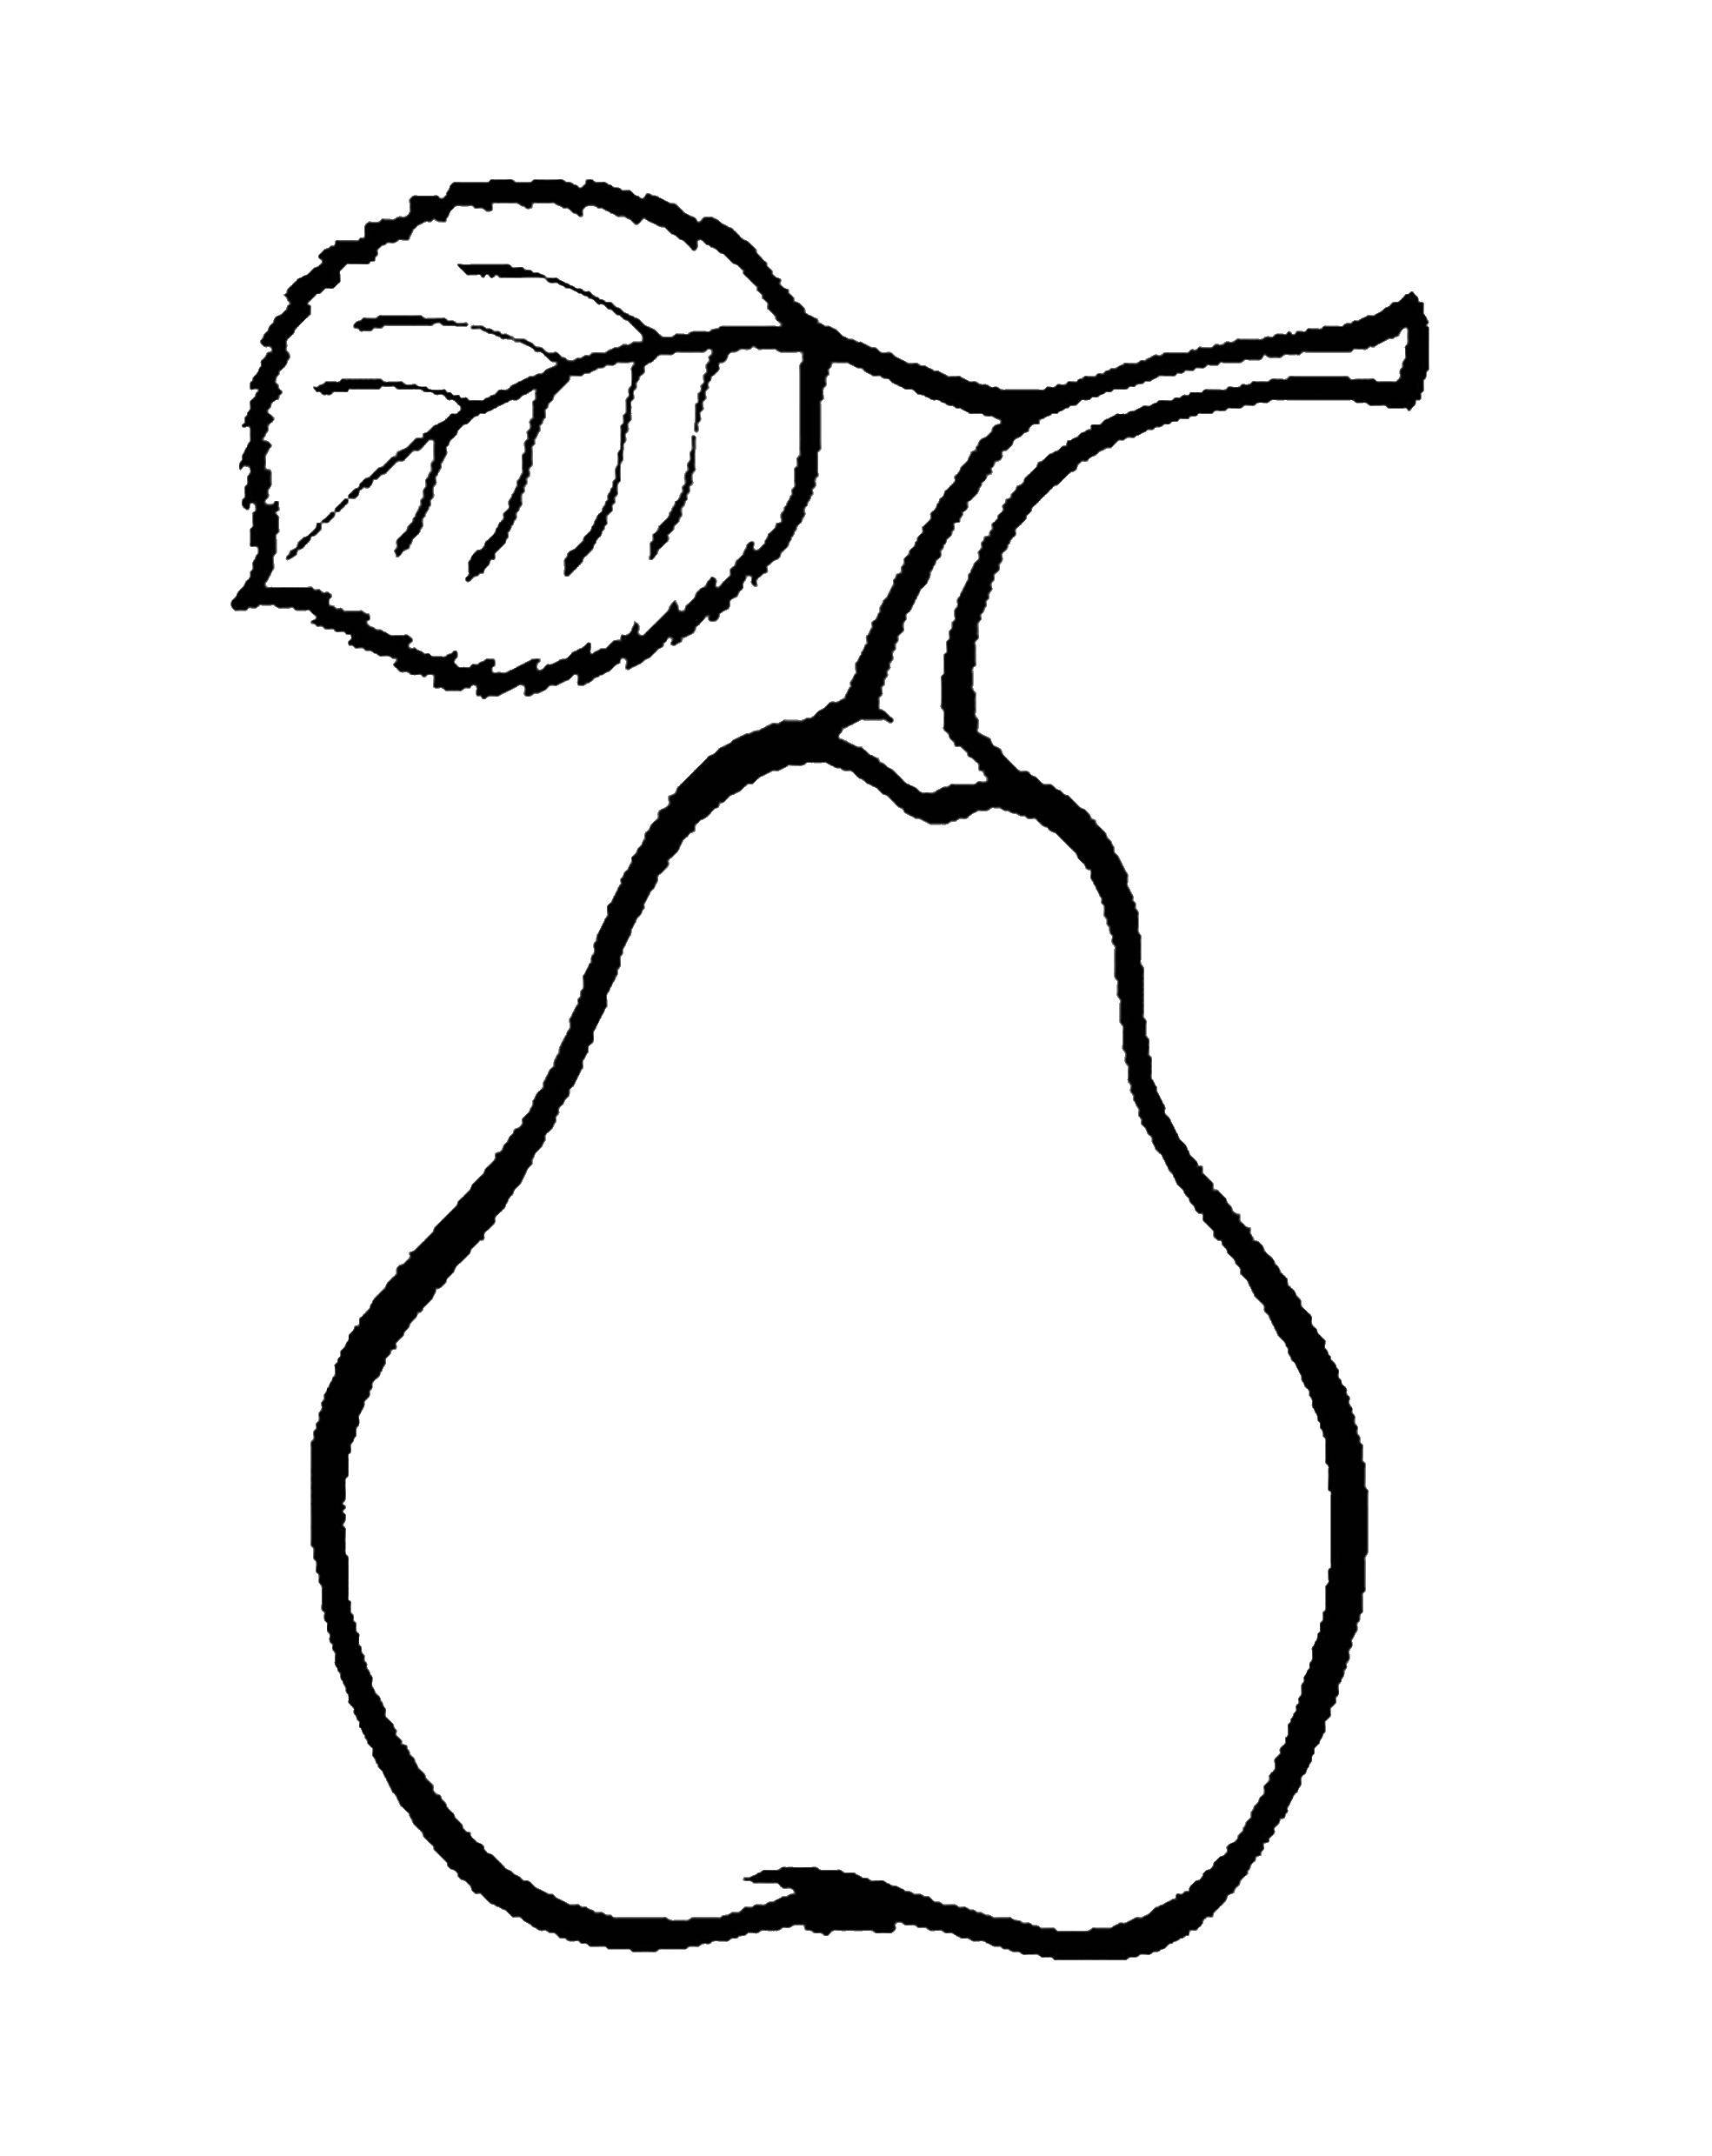 Coloring Pear. Category fruits. Tags:  fruit, pear.